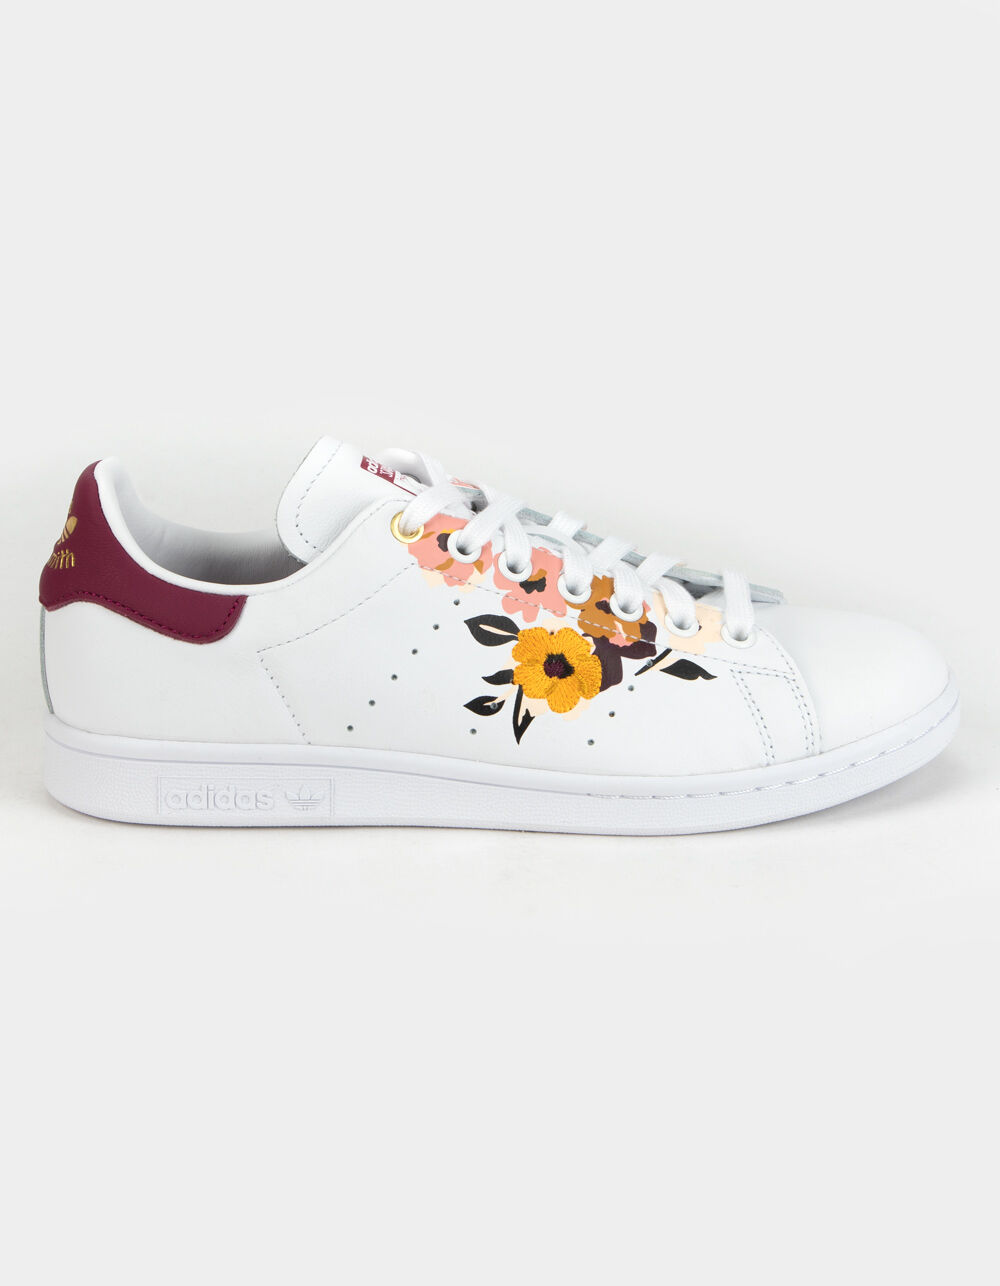 ADIDAS Stan Smith Floral Womens Shoes - WHITE/BERRY | Tillys